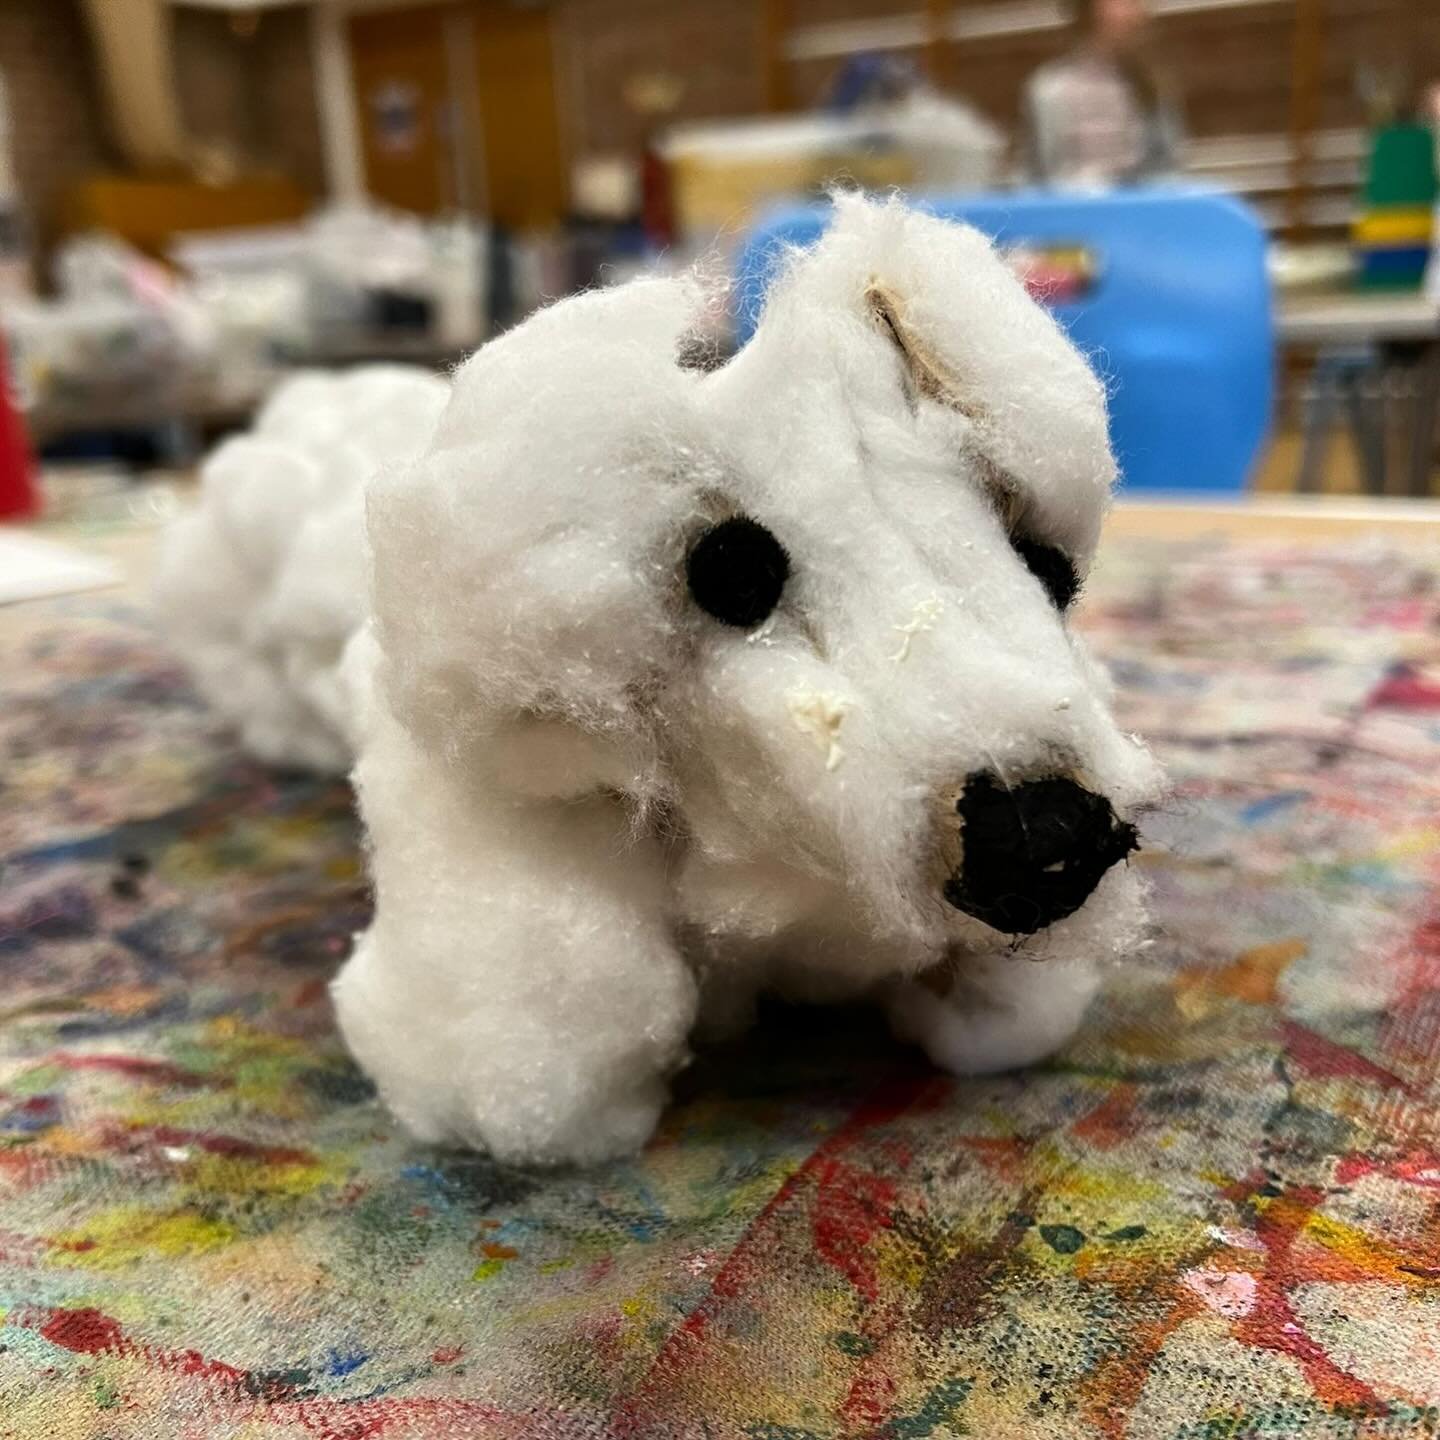 Oh my goodness this white dog 😍😍😍 we have some extremely skilled crafters in our Friday group! The theme this week was Ninja&rsquo;s and Geisha&rsquo;s 👀 I can&rsquo;t honestly say those ideas influenced ANY of these creations 😂 but we will keep